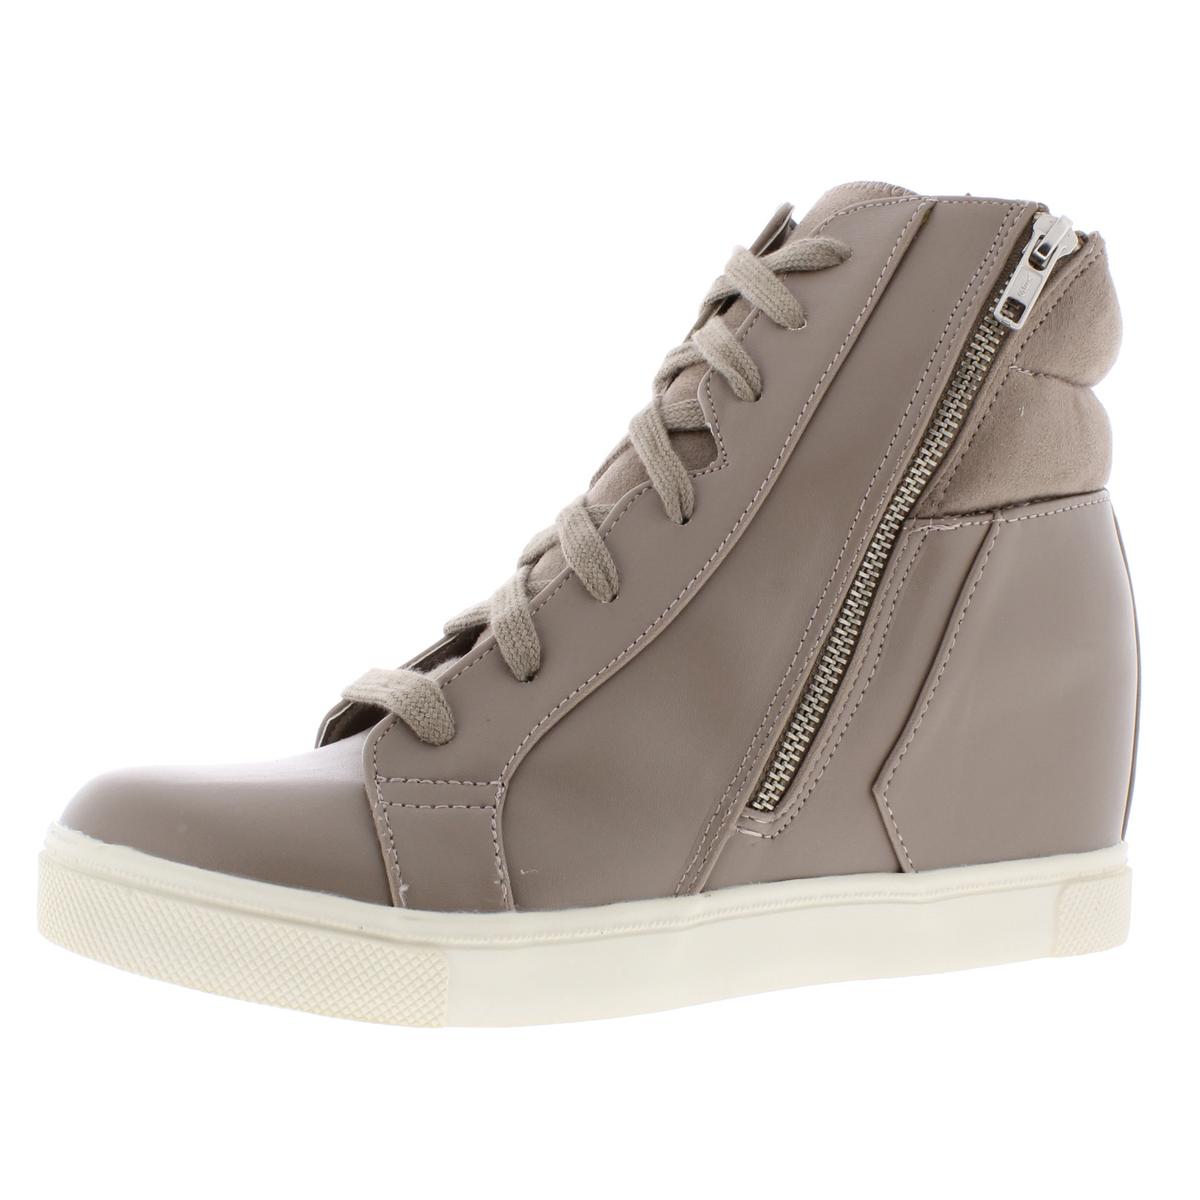 steve madden leather wedge sneakers